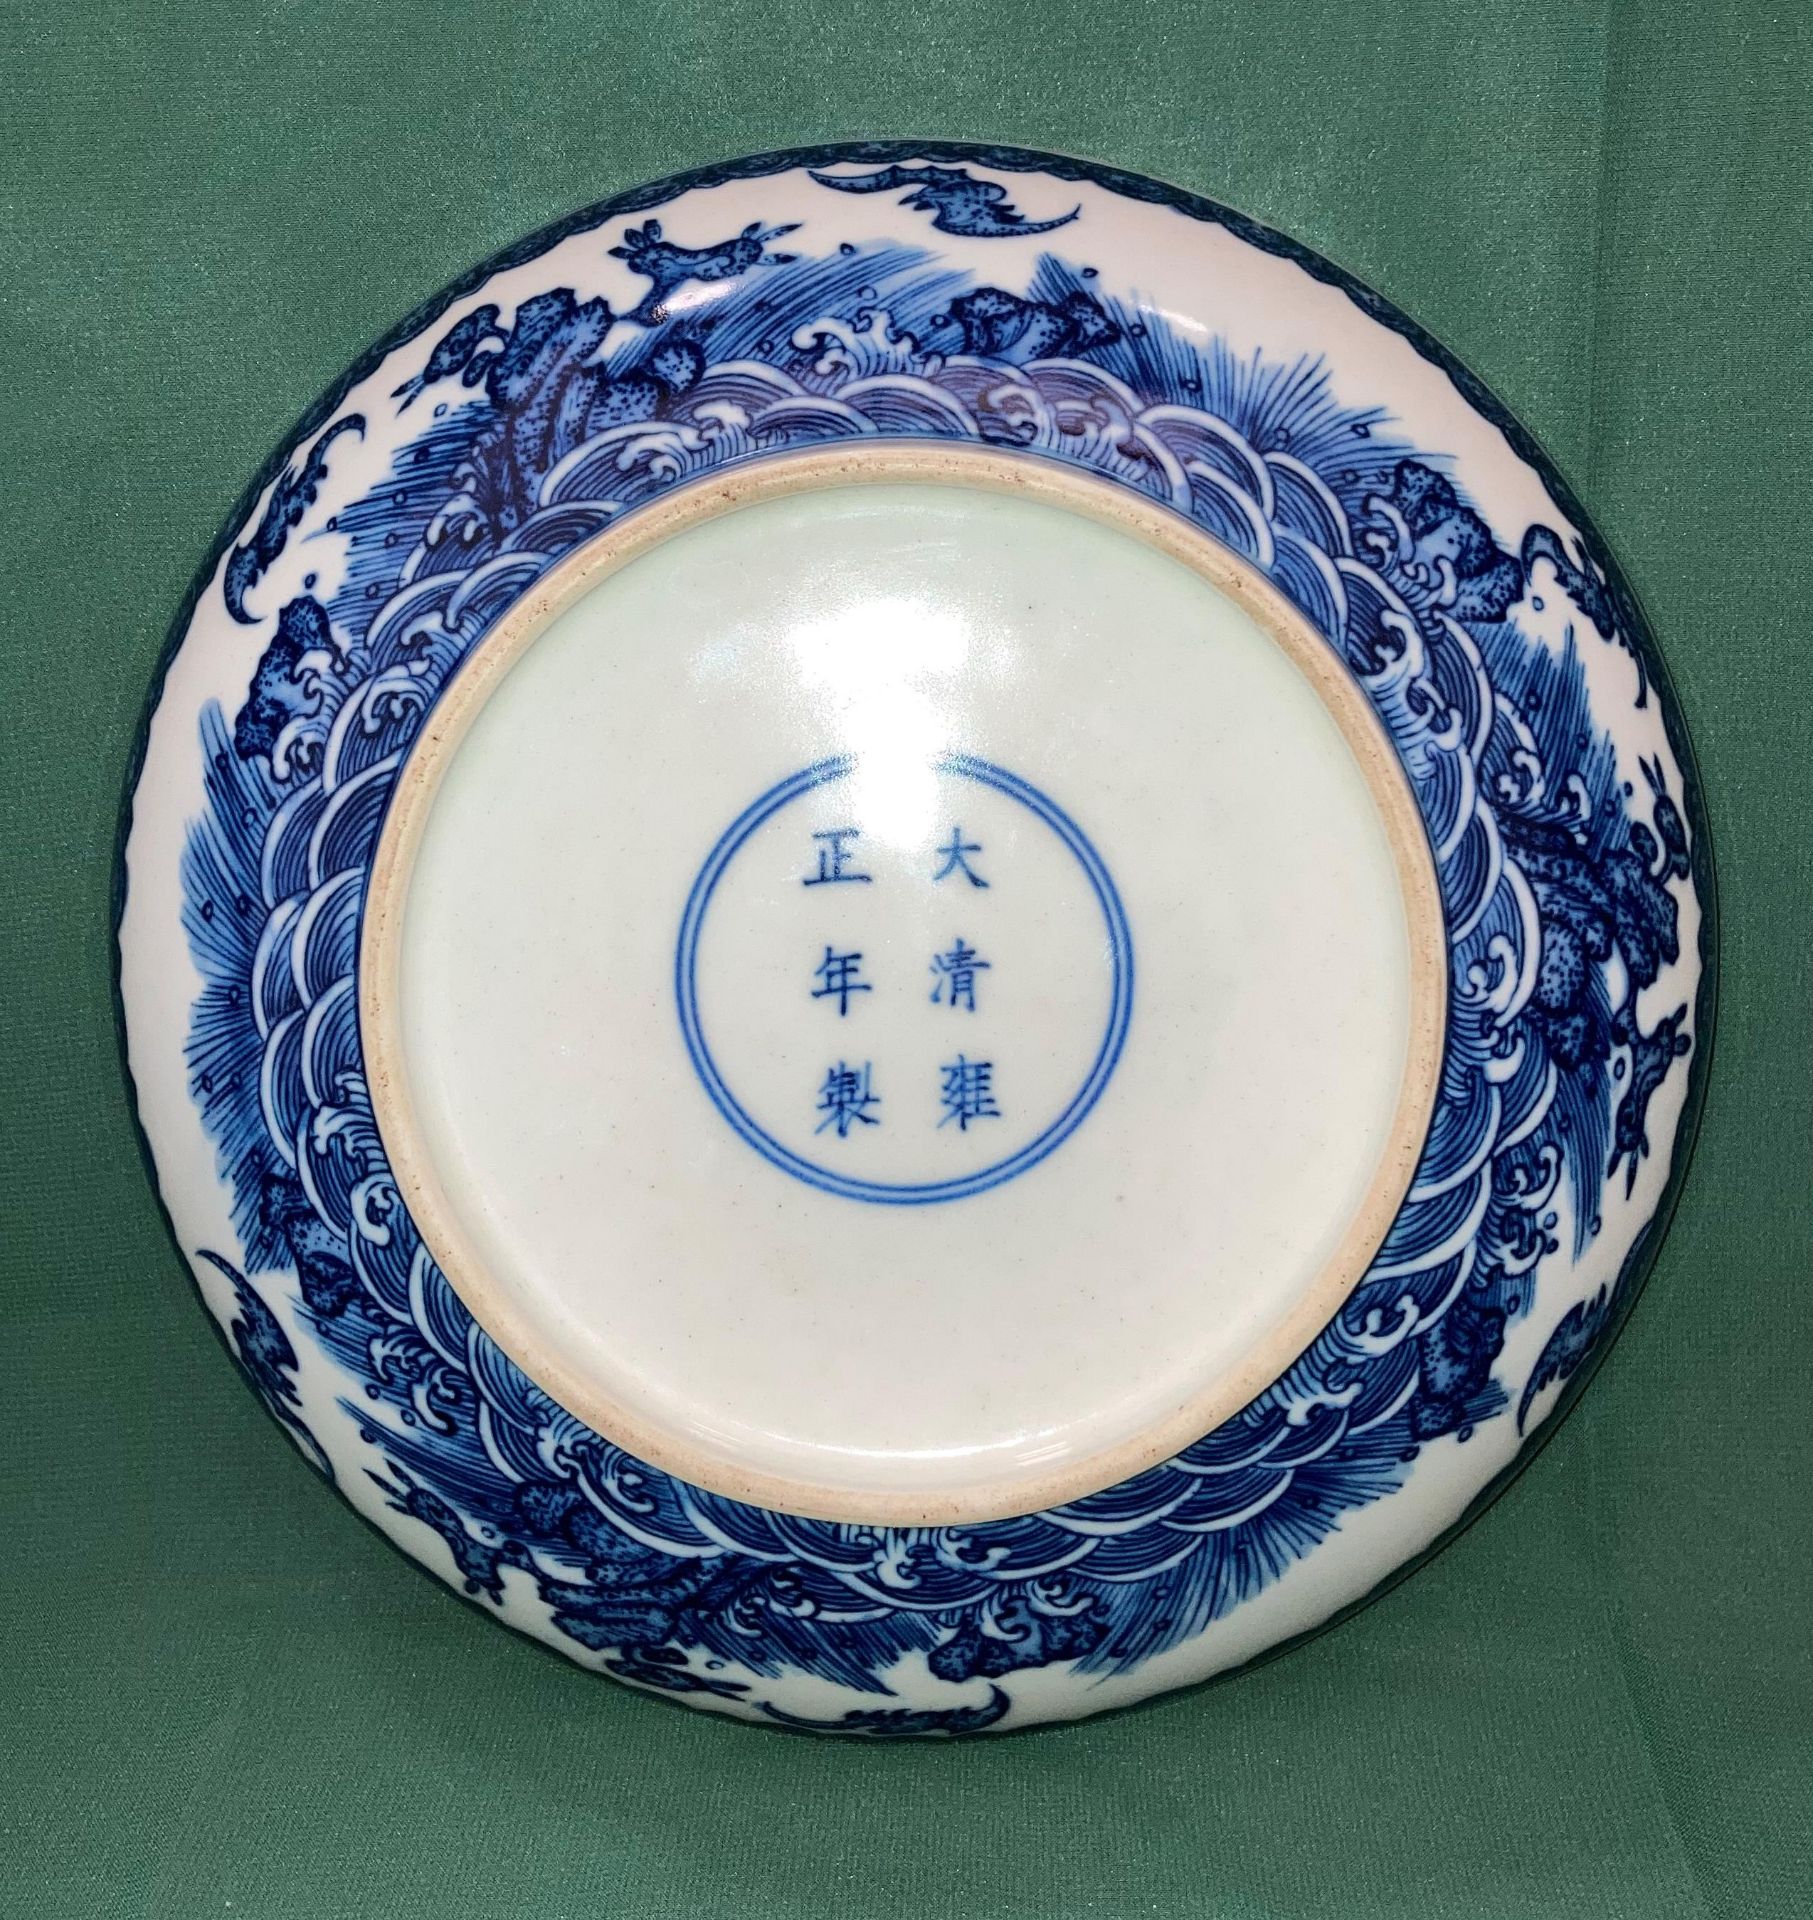 An antique 'Yongzheng' reign blue and white Oriental bowl with fig tree design and six symbol mark - Image 2 of 11